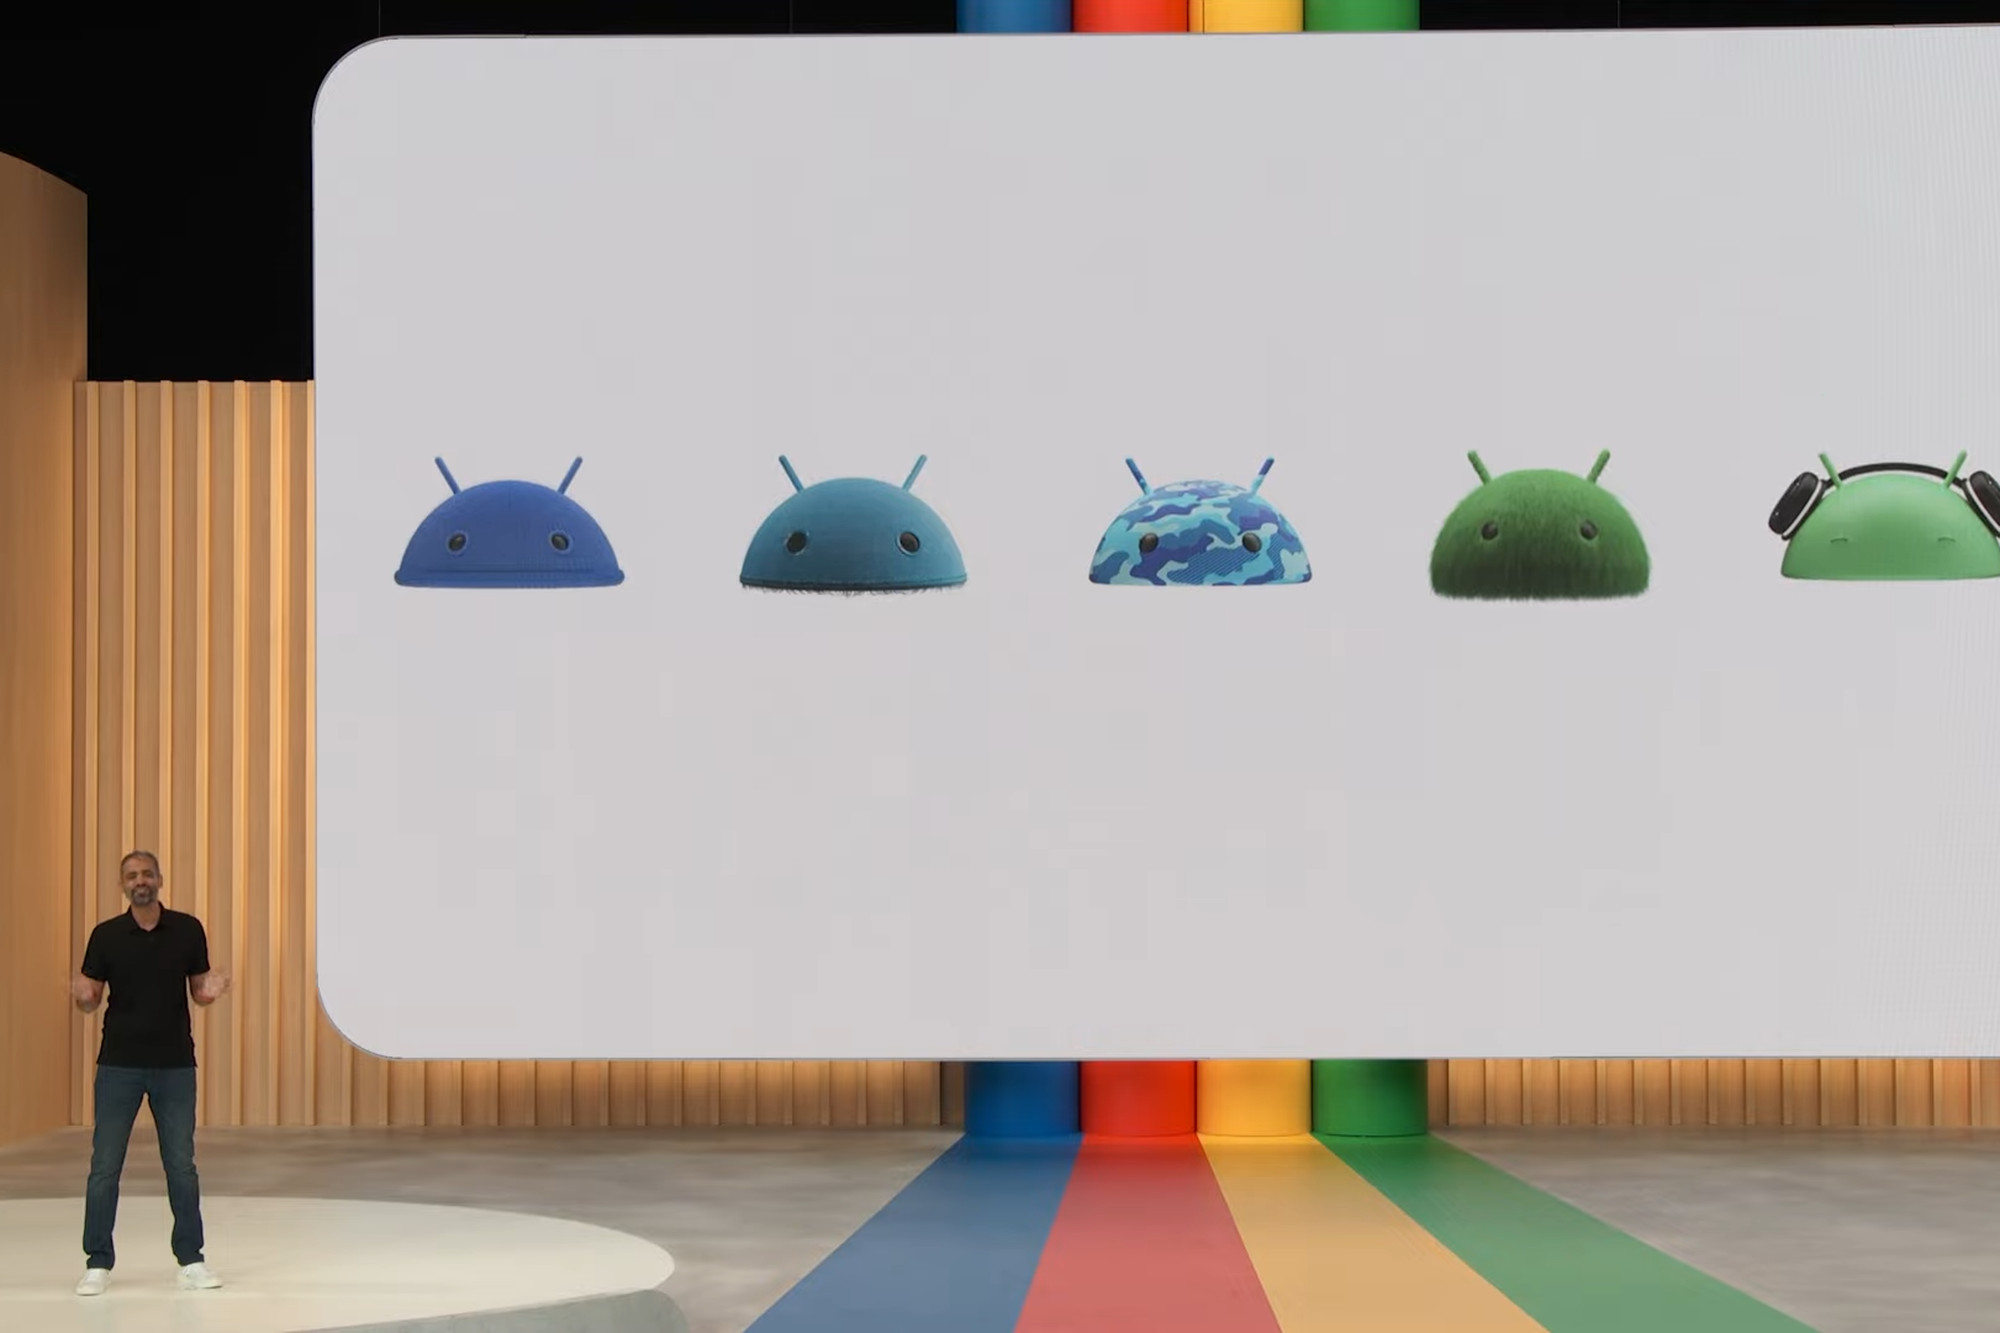 Google redesigns Android logo ahead of Android 14 release